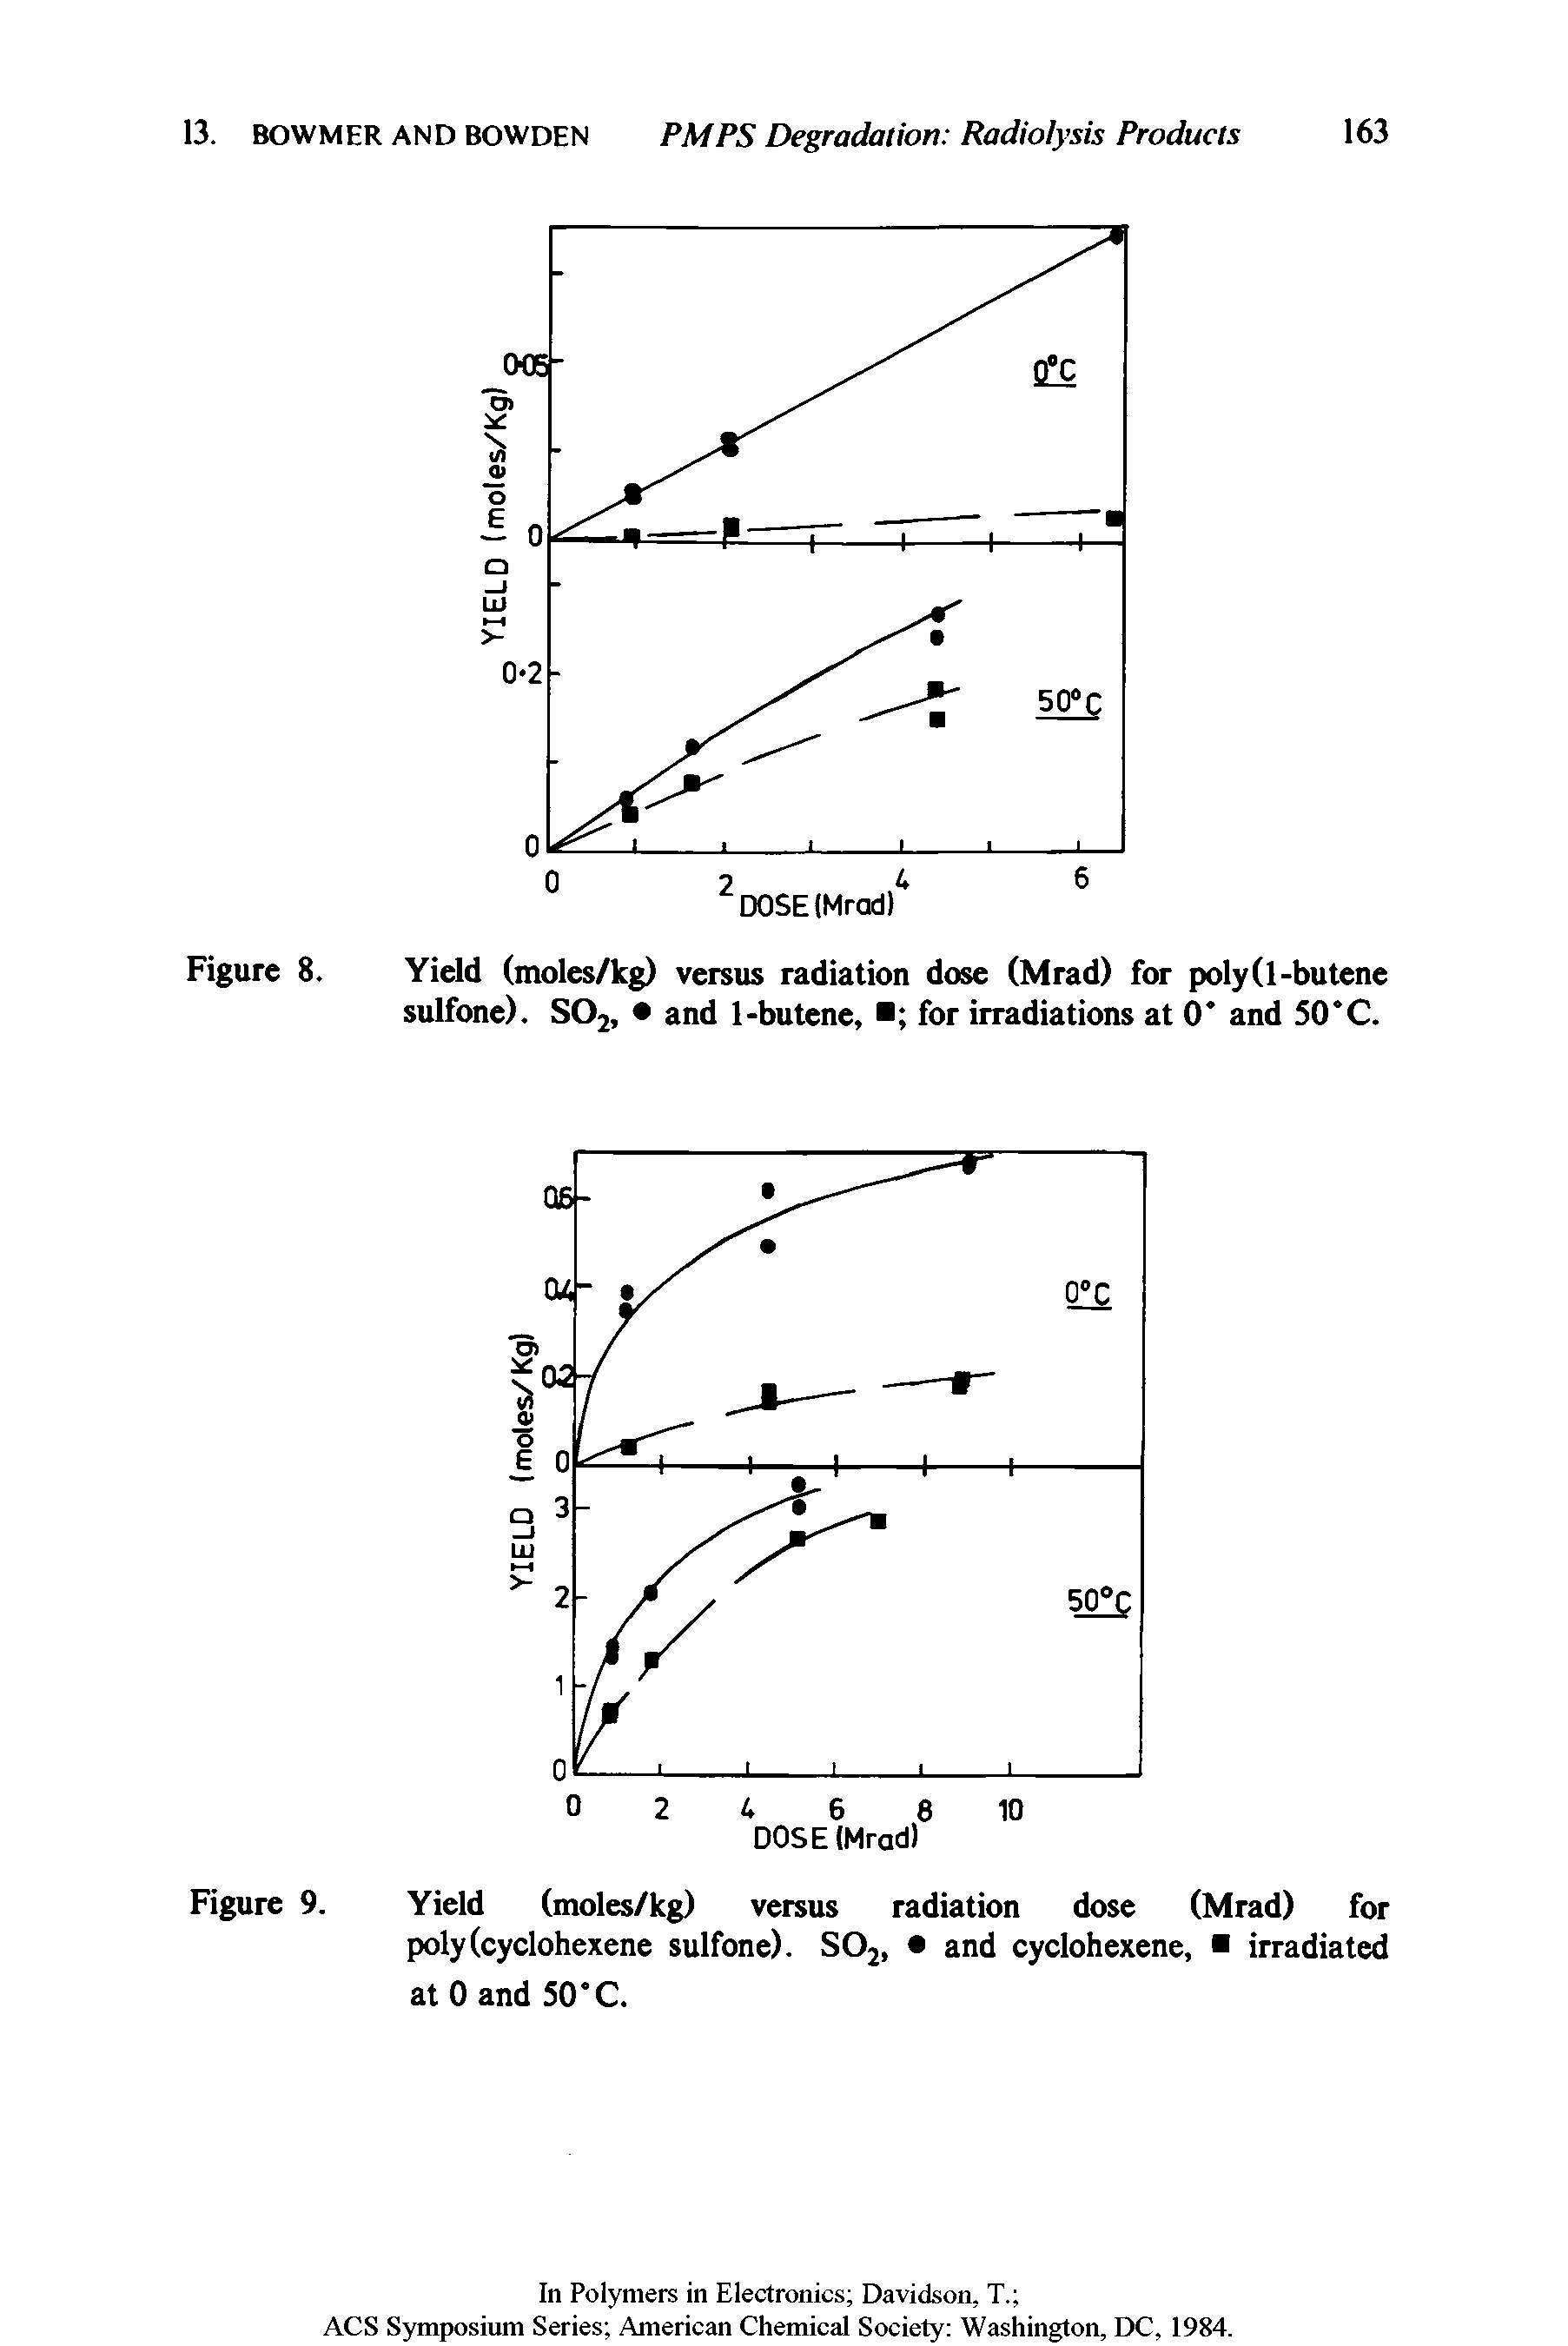 Figure 8. Yield (moles/kg) versus radiation dose (Mrad) for poly(l-butene sulfone). S02, and 1-butene, for irradiations at 0 and 50 °C.